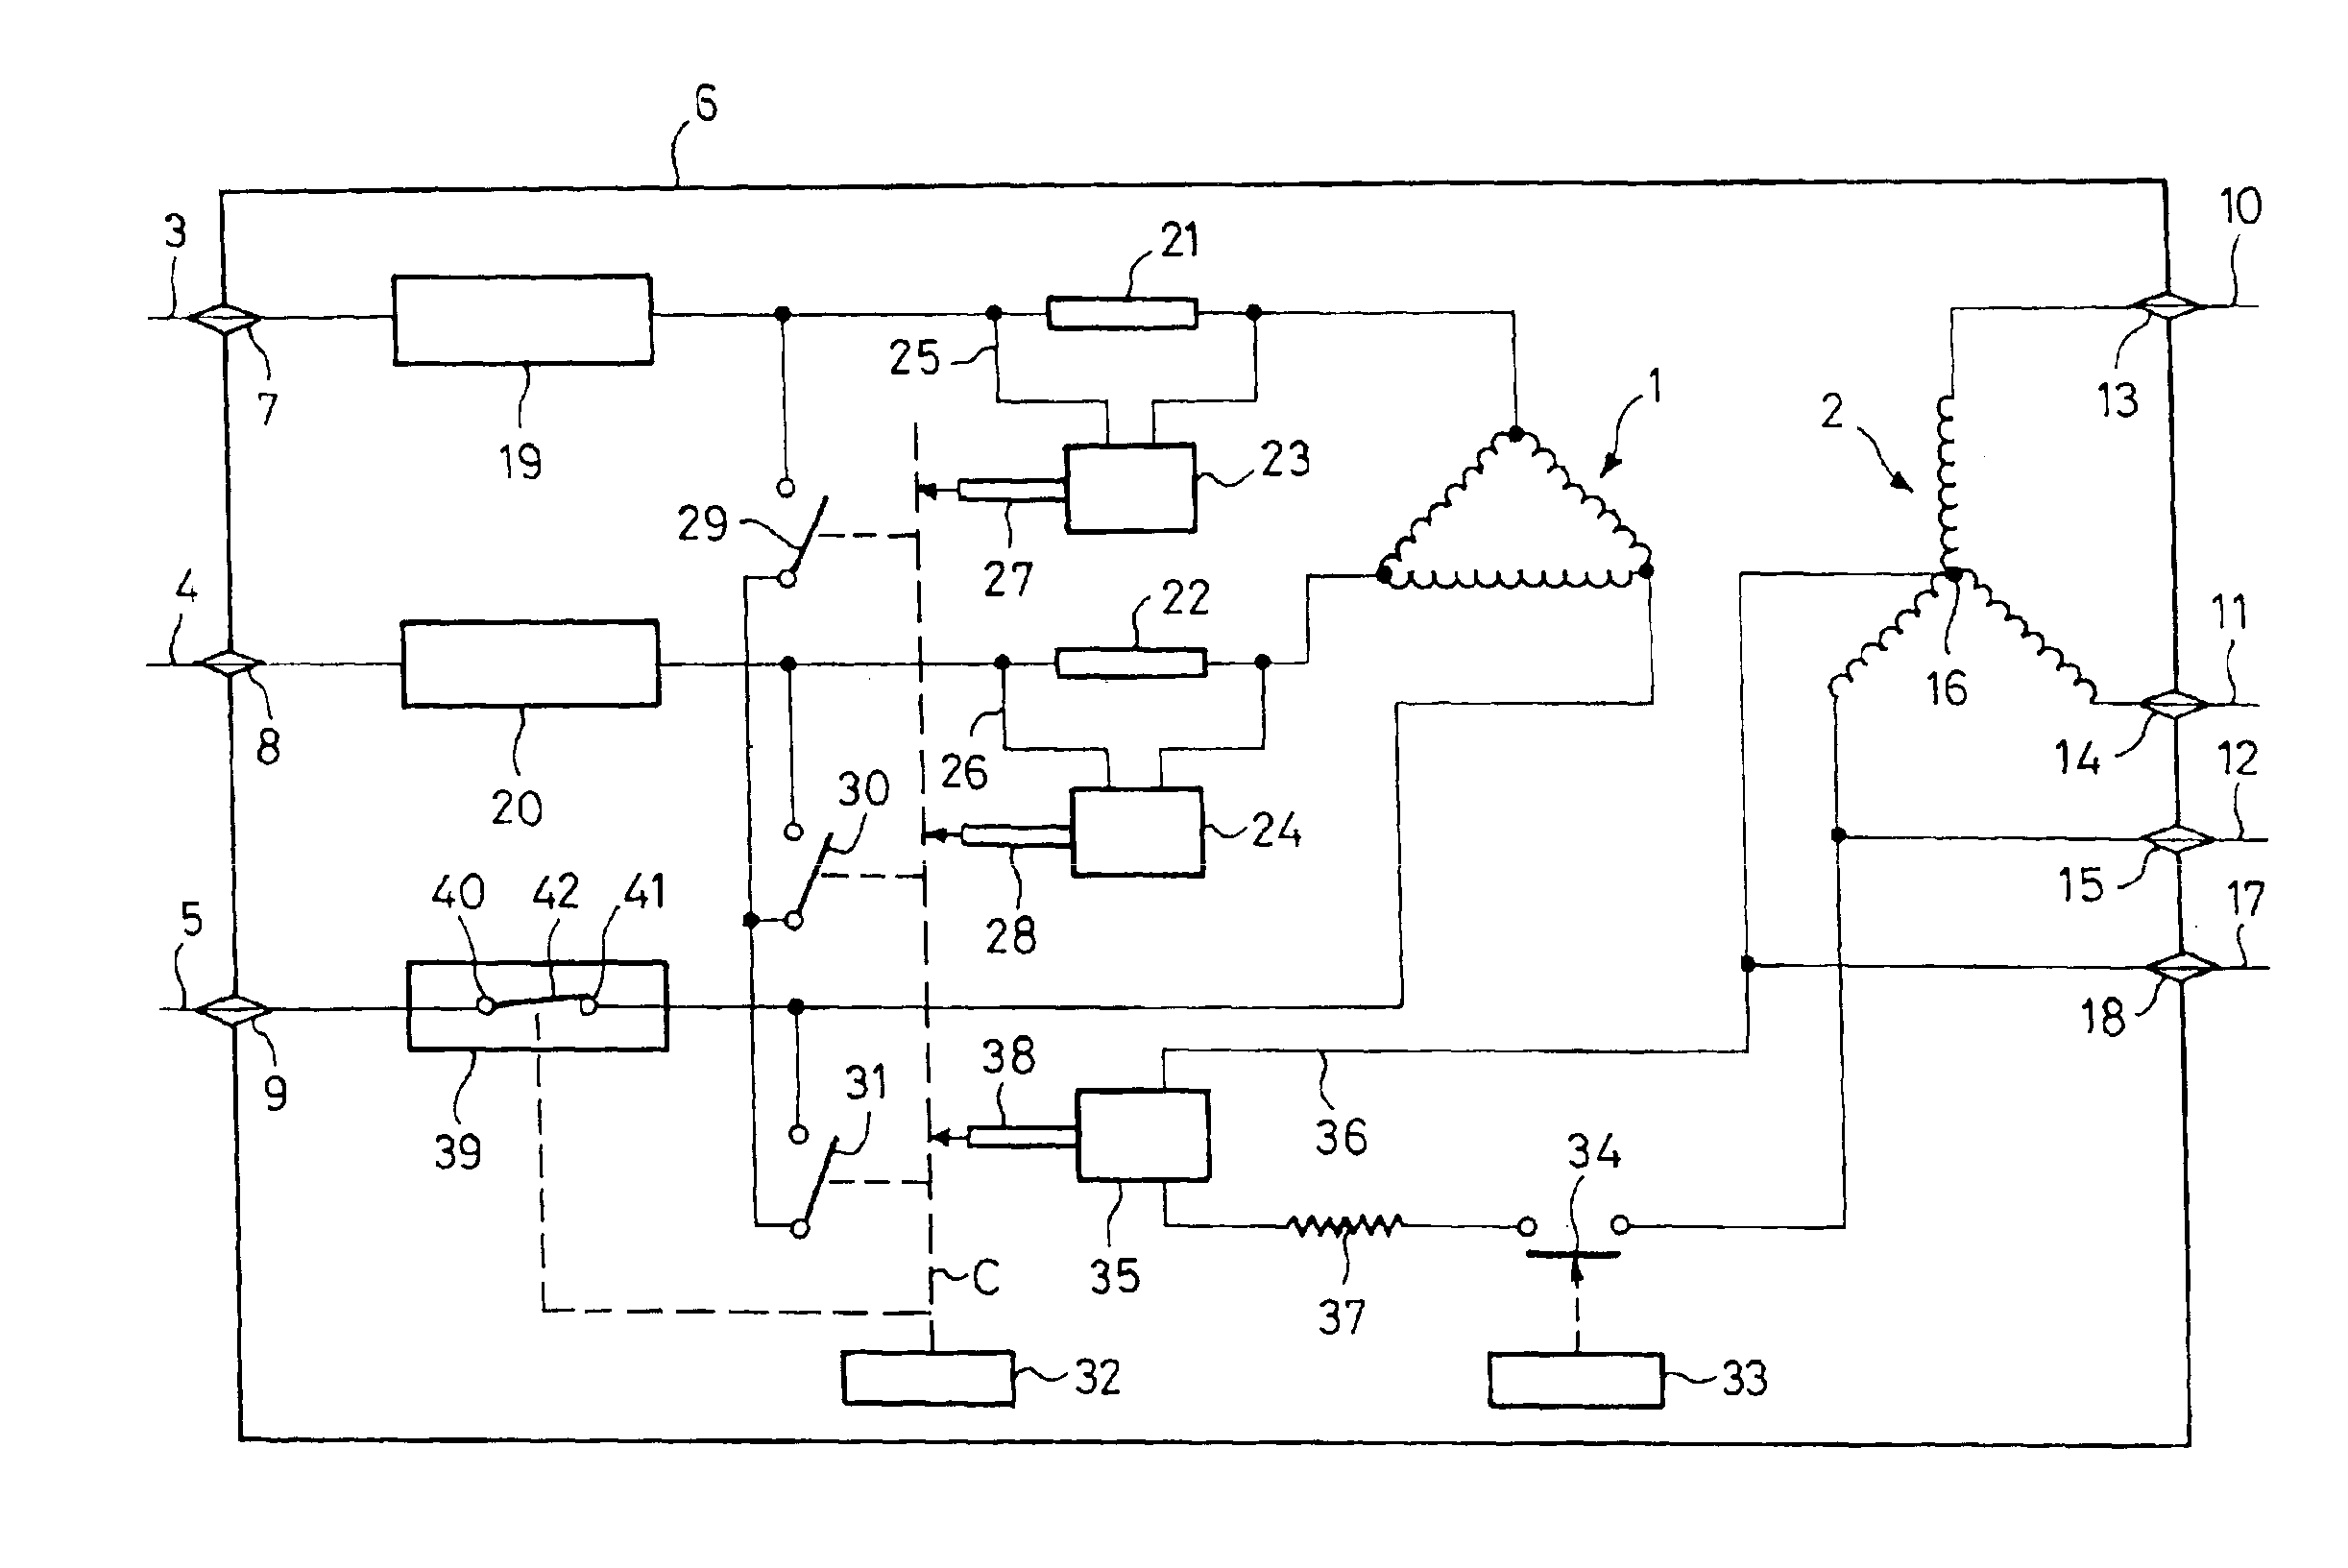 Protection system for protecting a poly-phase distribution transformer insulated in a liquid dielectric, the system including at least one phase disconnector switch